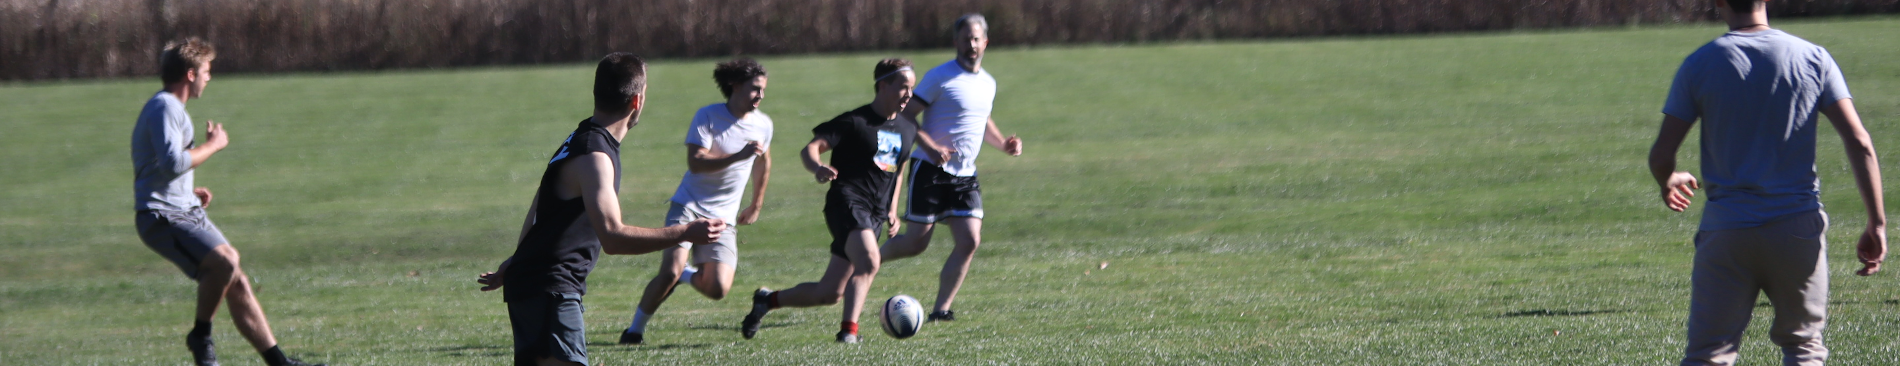 A student guides the ball down the field with others in pursuit